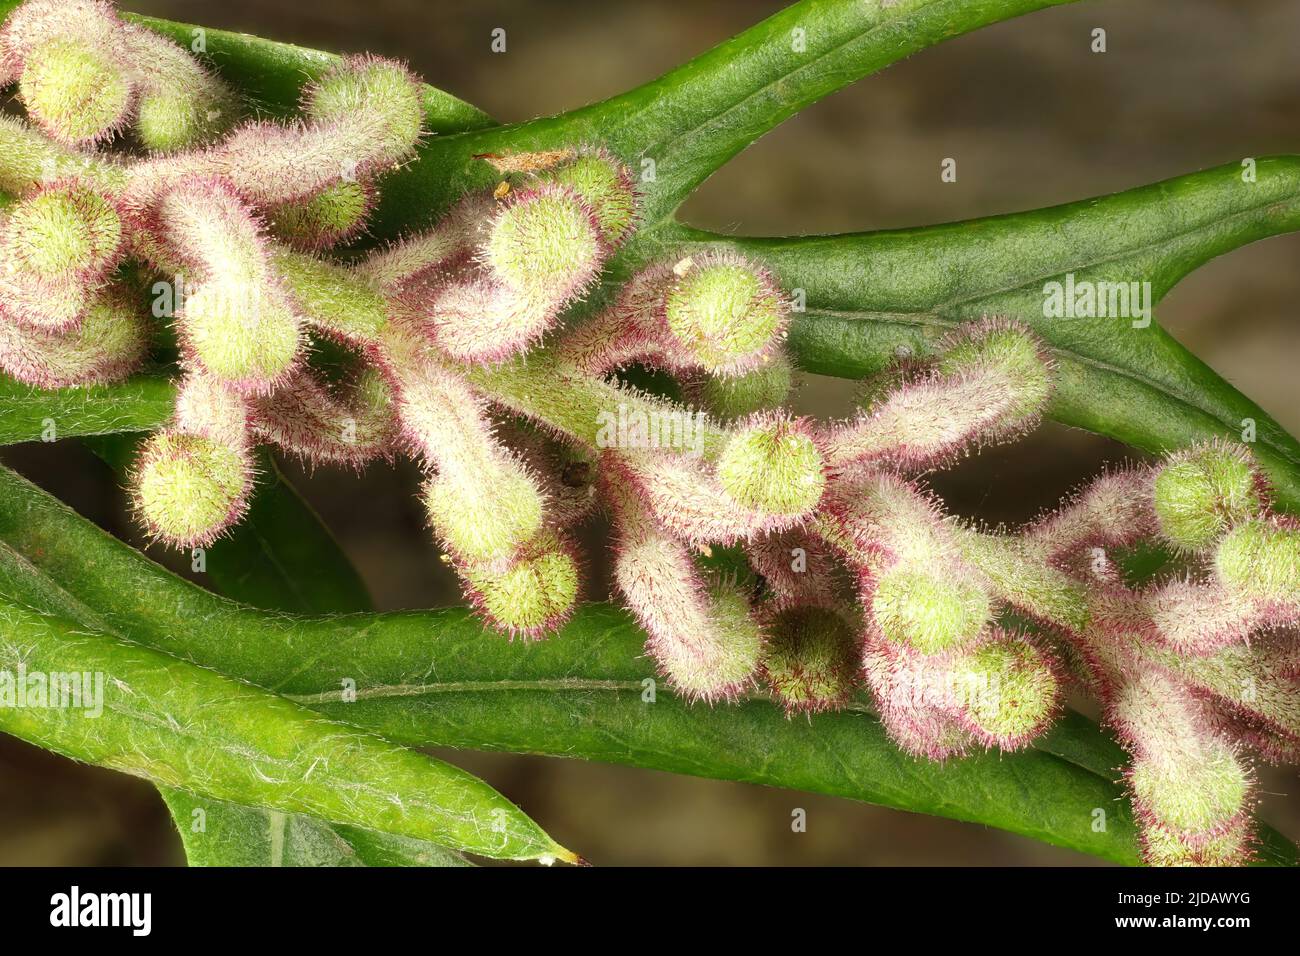 Isolated inflorescence of Grevillea Robyn buds and foliage Stock Photo